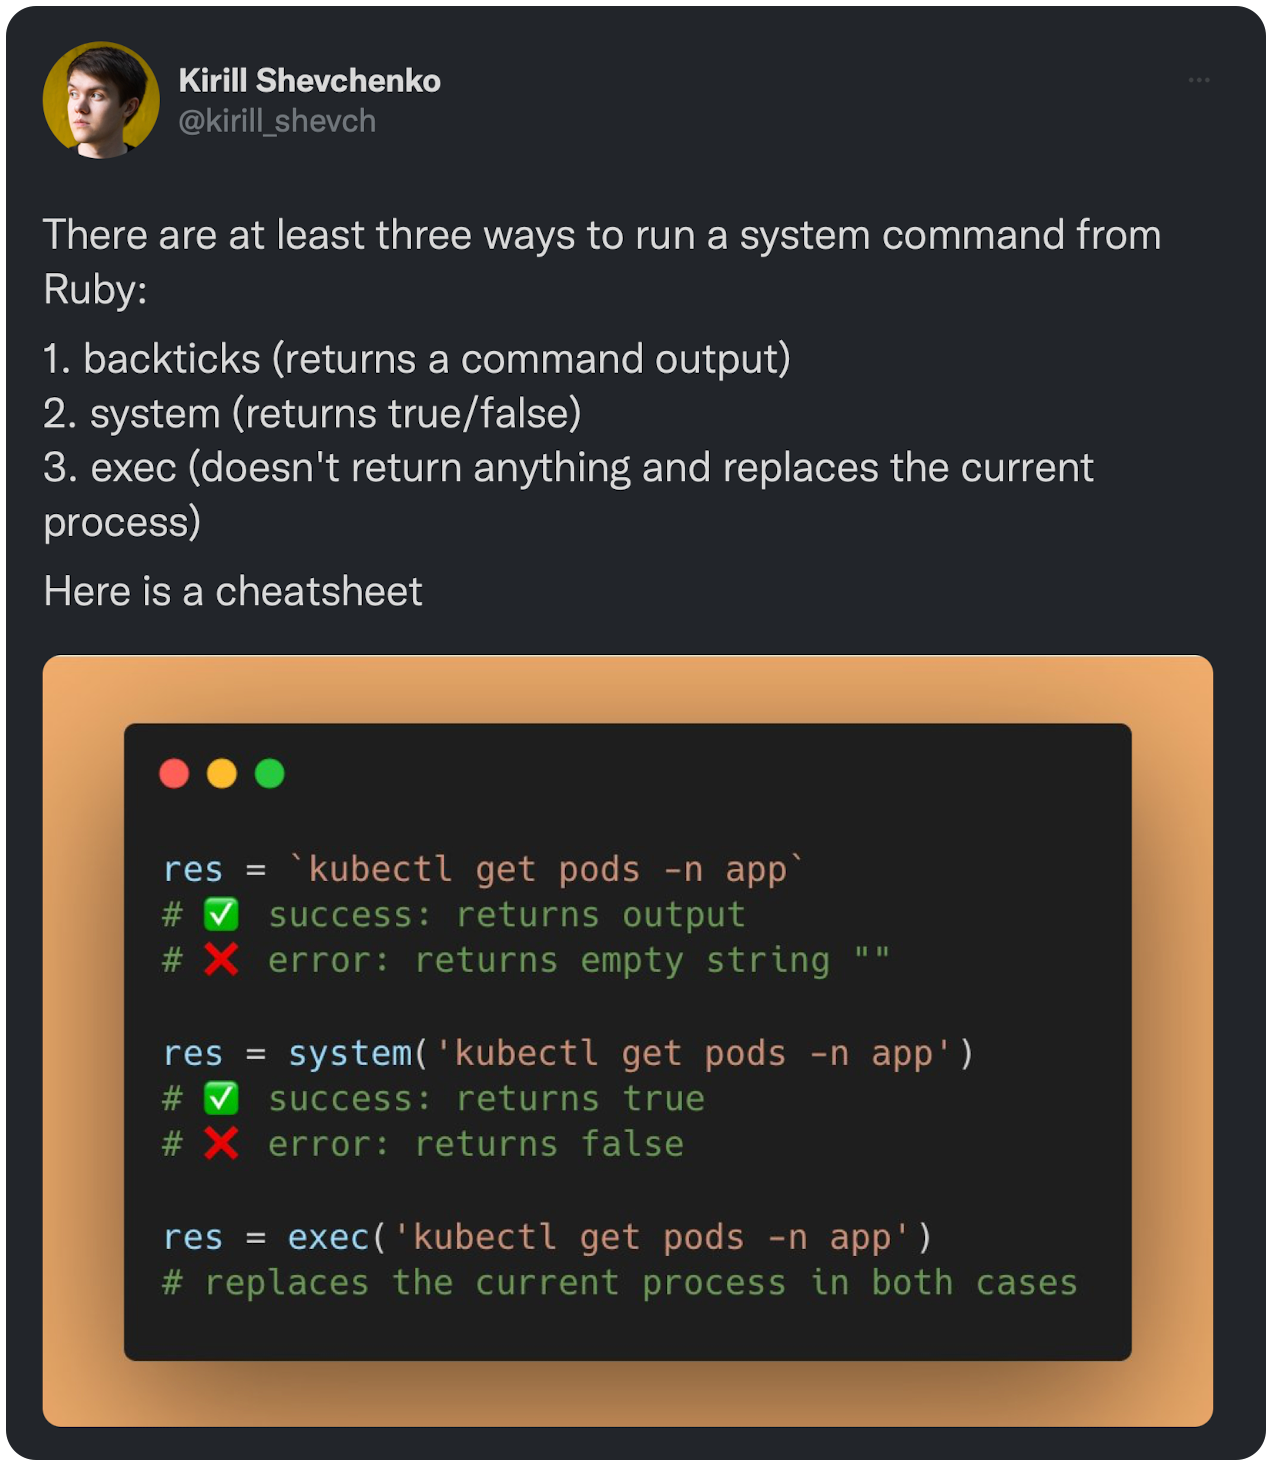 There are at least three ways to run a system command from Ruby: 1. backticks (returns a command output) 2. system (returns true/false) 3. exec (doesn't return anything and replaces the current process) Here is a cheatsheet